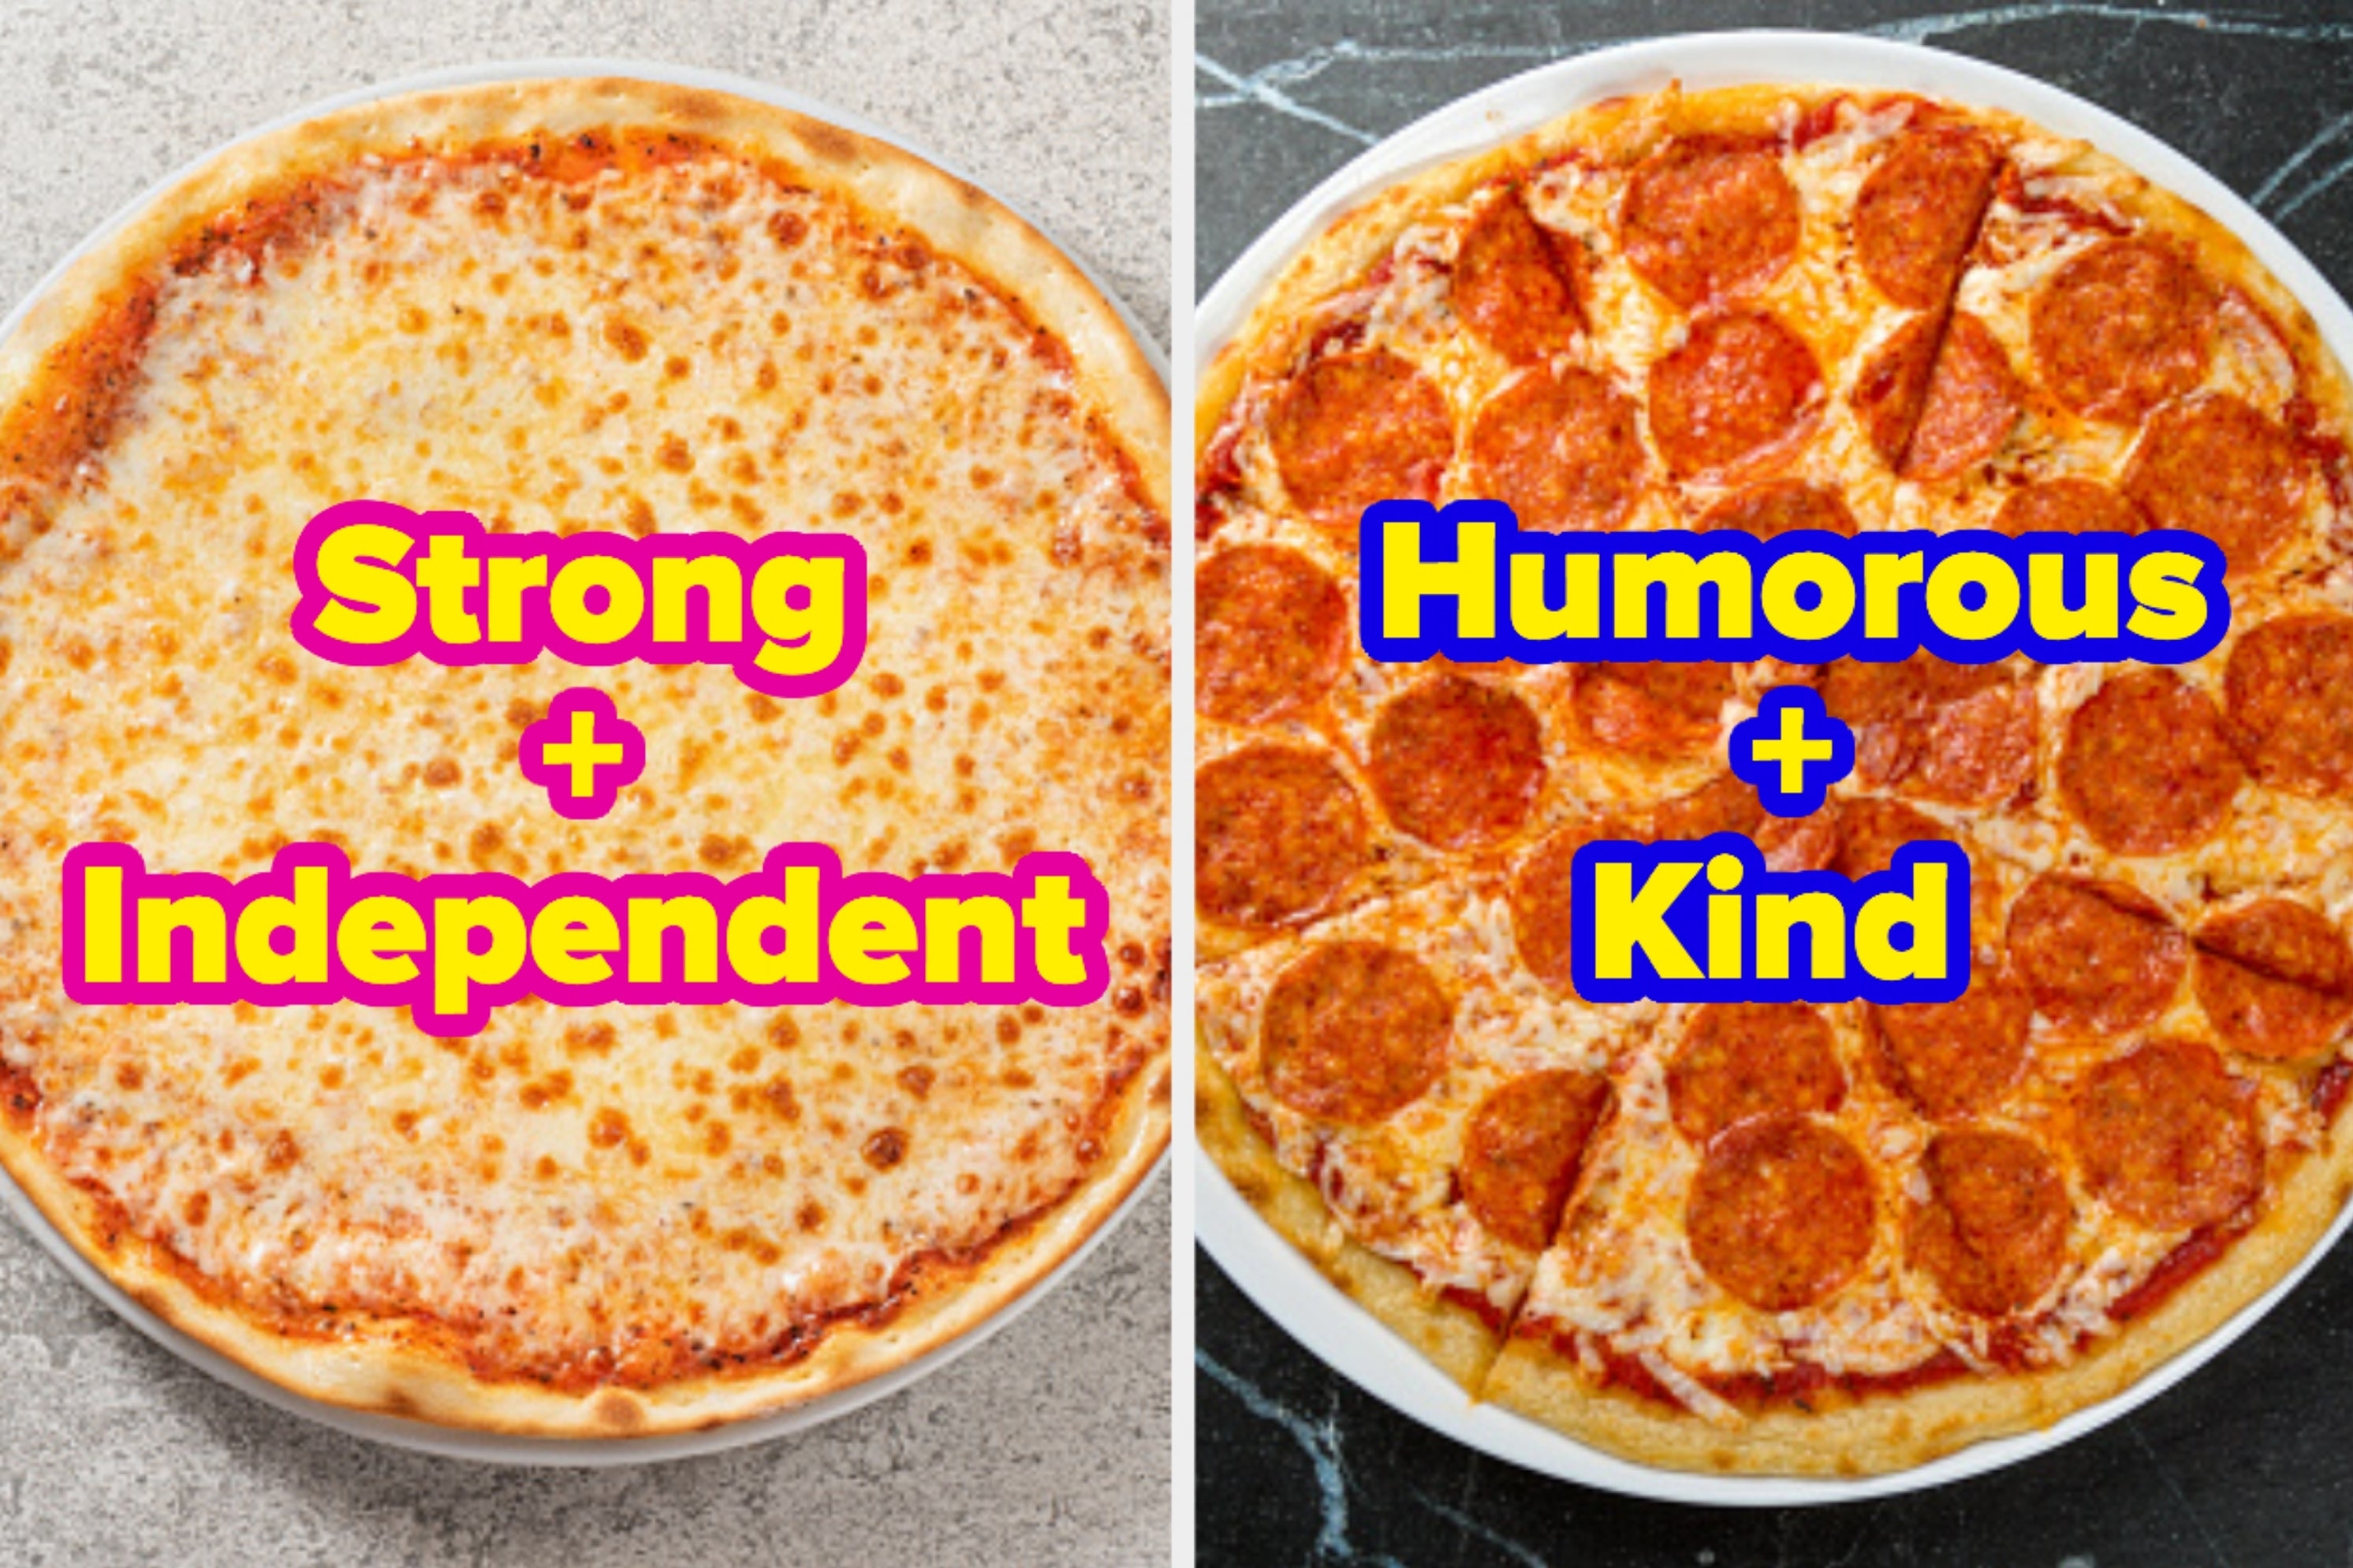 On the left, a cheese pizza that&#x27;s labeled strong and independent, and on the right, a pepperoni pizza labeled humorous and kind